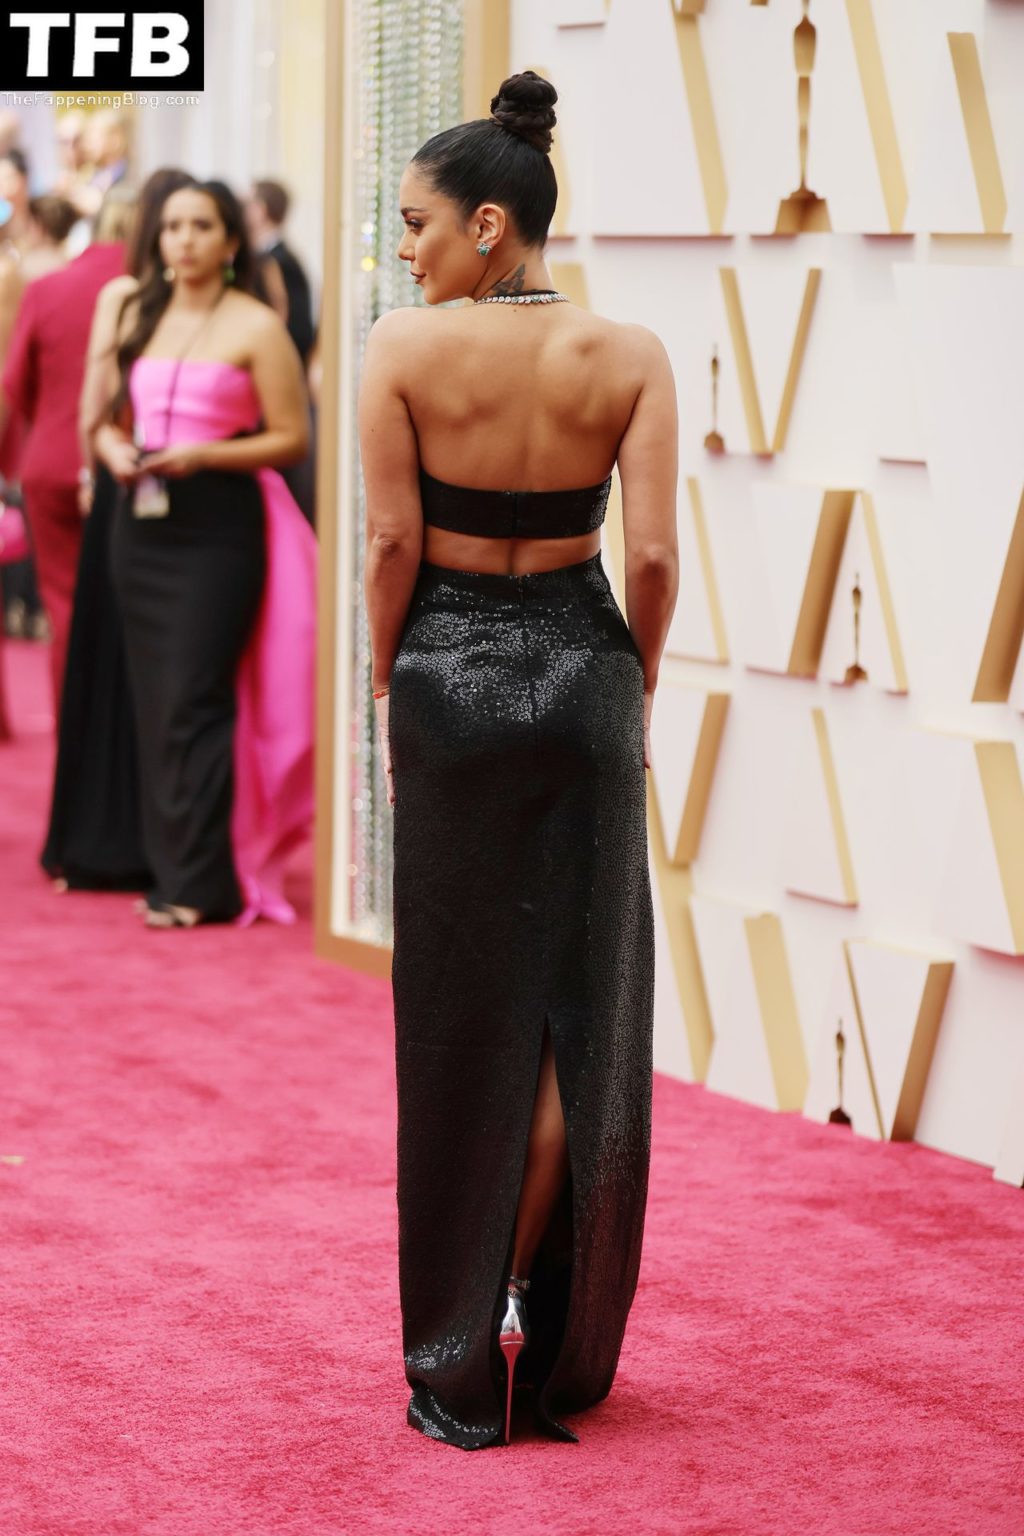 Vanessa Hudgens Sexy The Fappening Blog 31 4 1024x1536 - Vanessa Hudgens Poses on the Red Carpet at the 94th Annual Academy Awards (83 Photos)